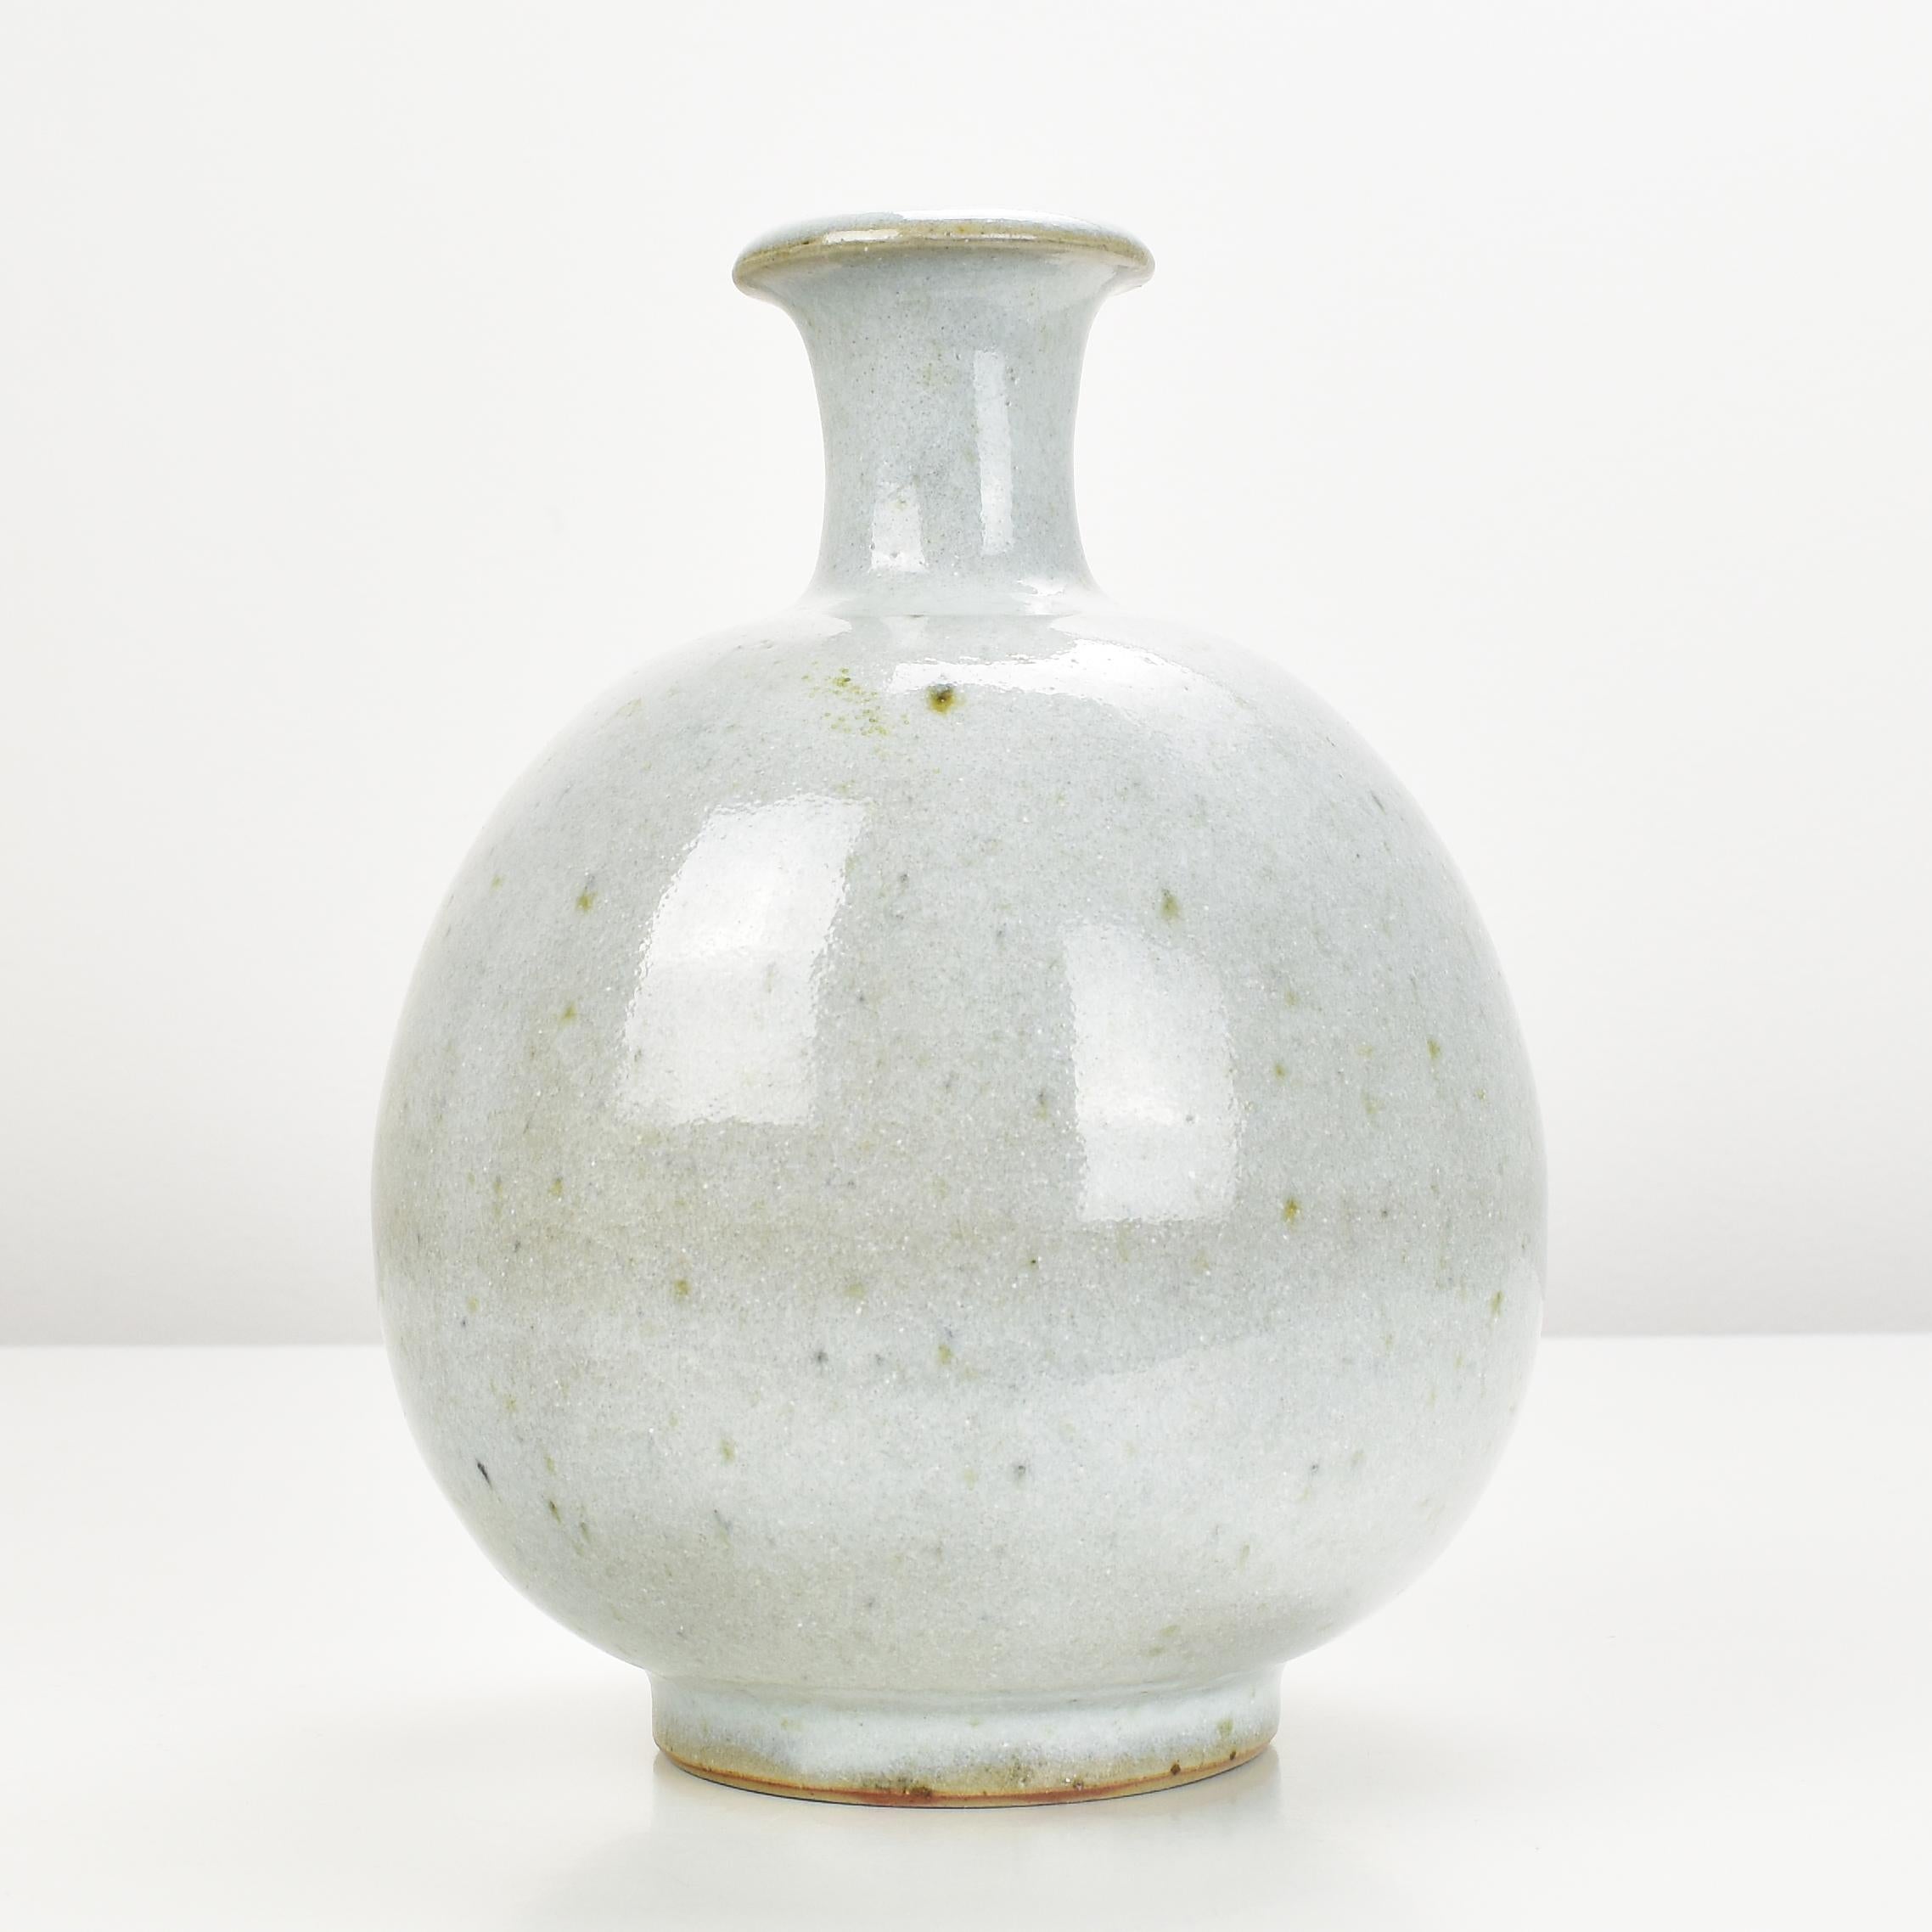 A beautiful vibrant gray glazed bottle vase by German ceramicist Horst Kerstan.
His work is featured by a distinct language of forms and the inspiration by Chinese and Japanese glazing techniques. Horst Kerstan, who was an apprentice of Richard